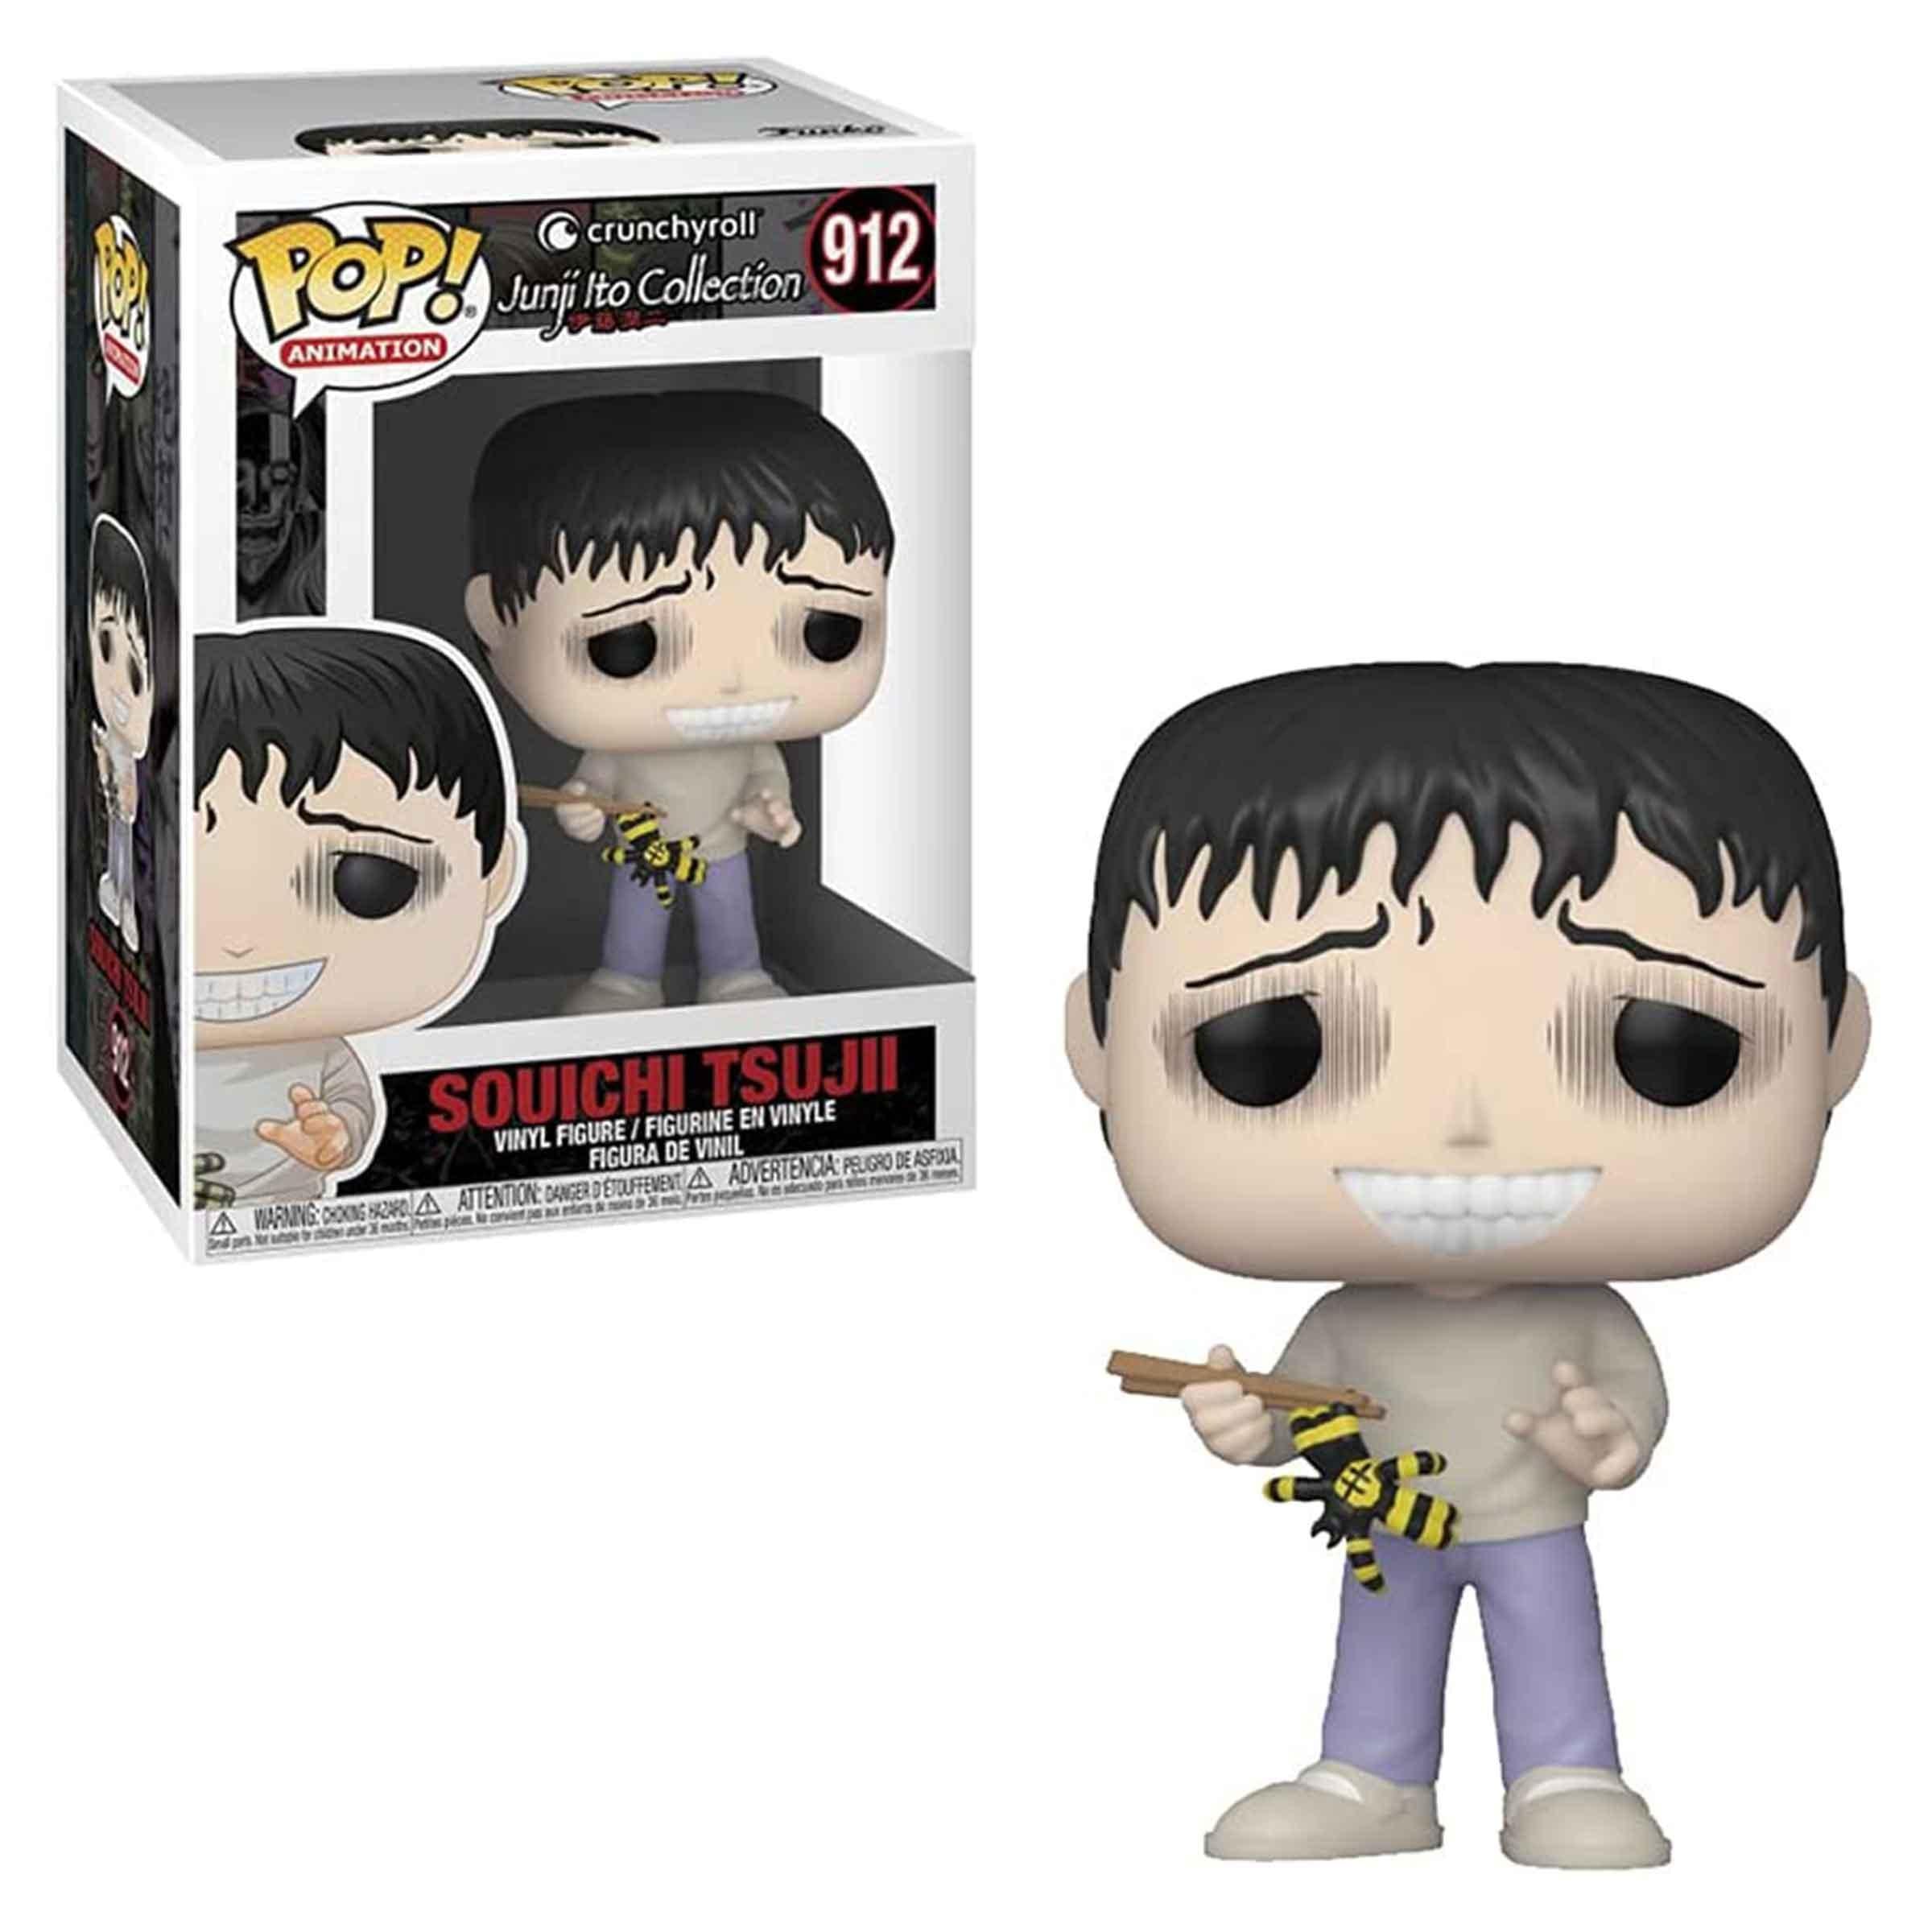 Junji Ito Collection Gets a Wave of Creepy Funko Pops